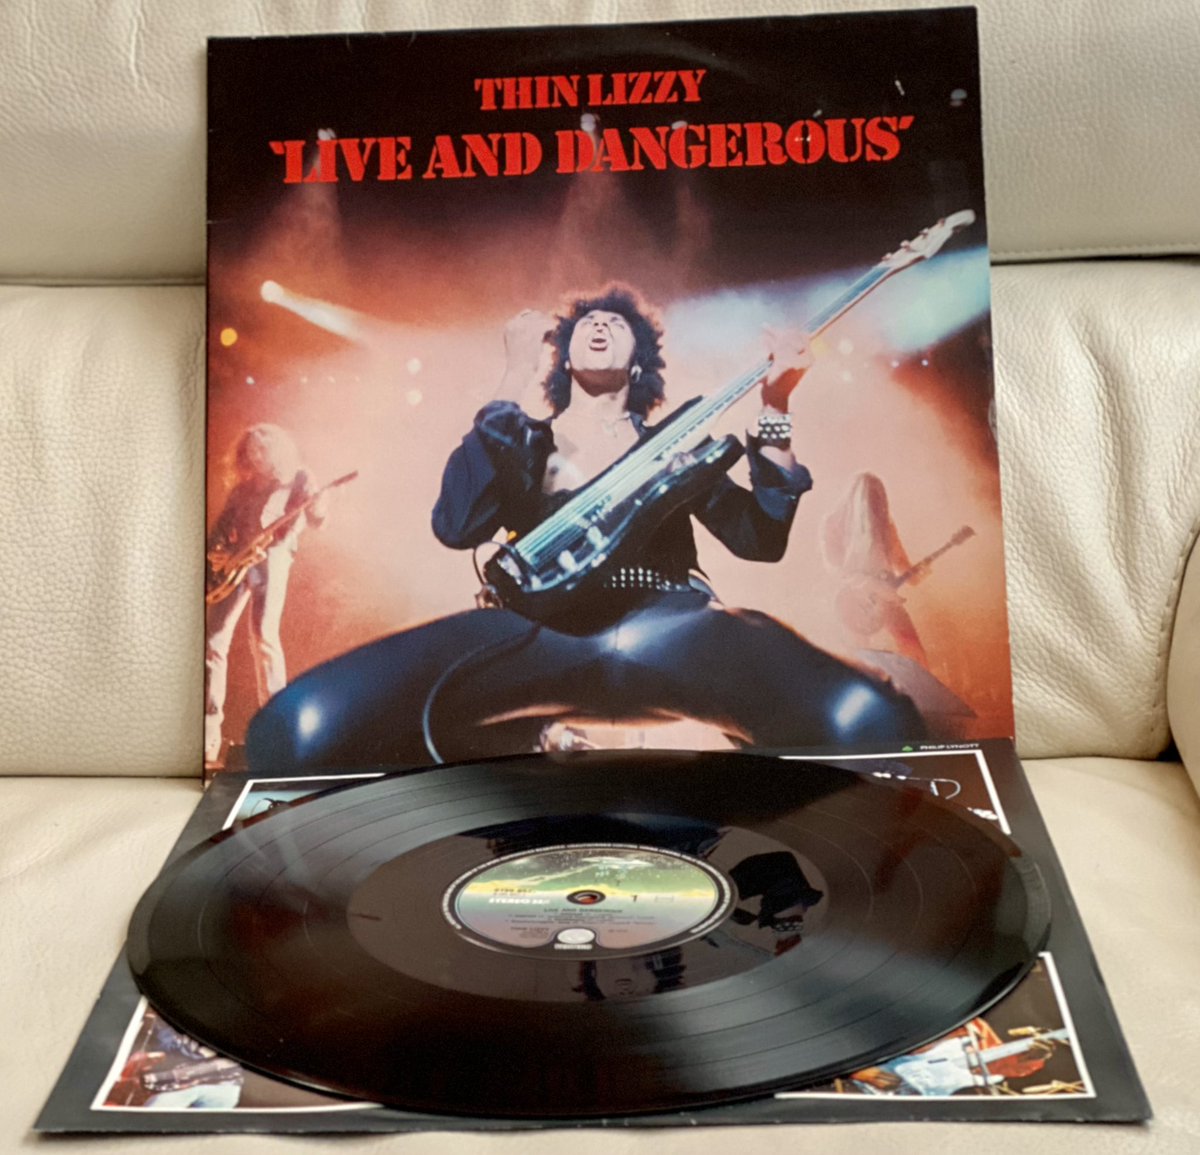 #NowPlaying #ThinLizzy #LiveandDangerous 🎸👌🎸